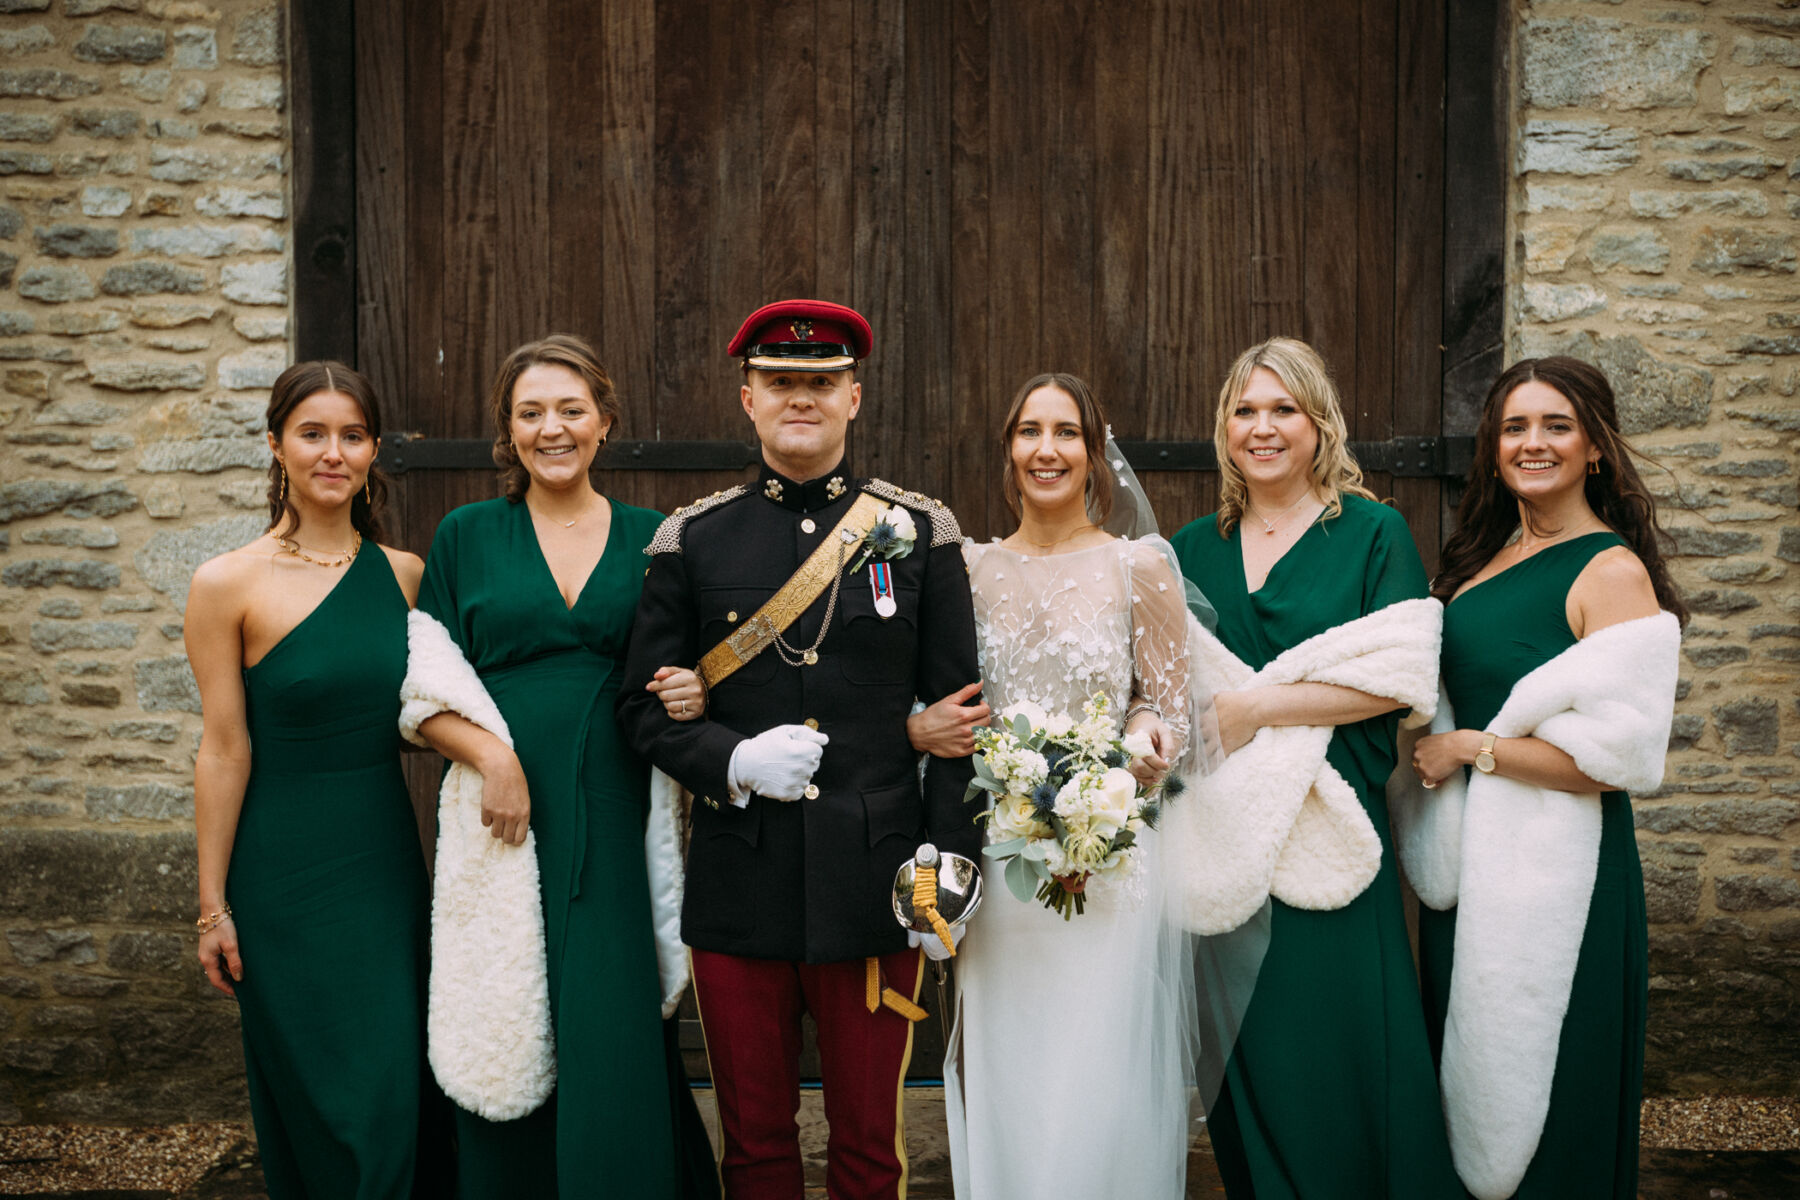 Bridesmaids in asymmetrical green dresses from Reformation